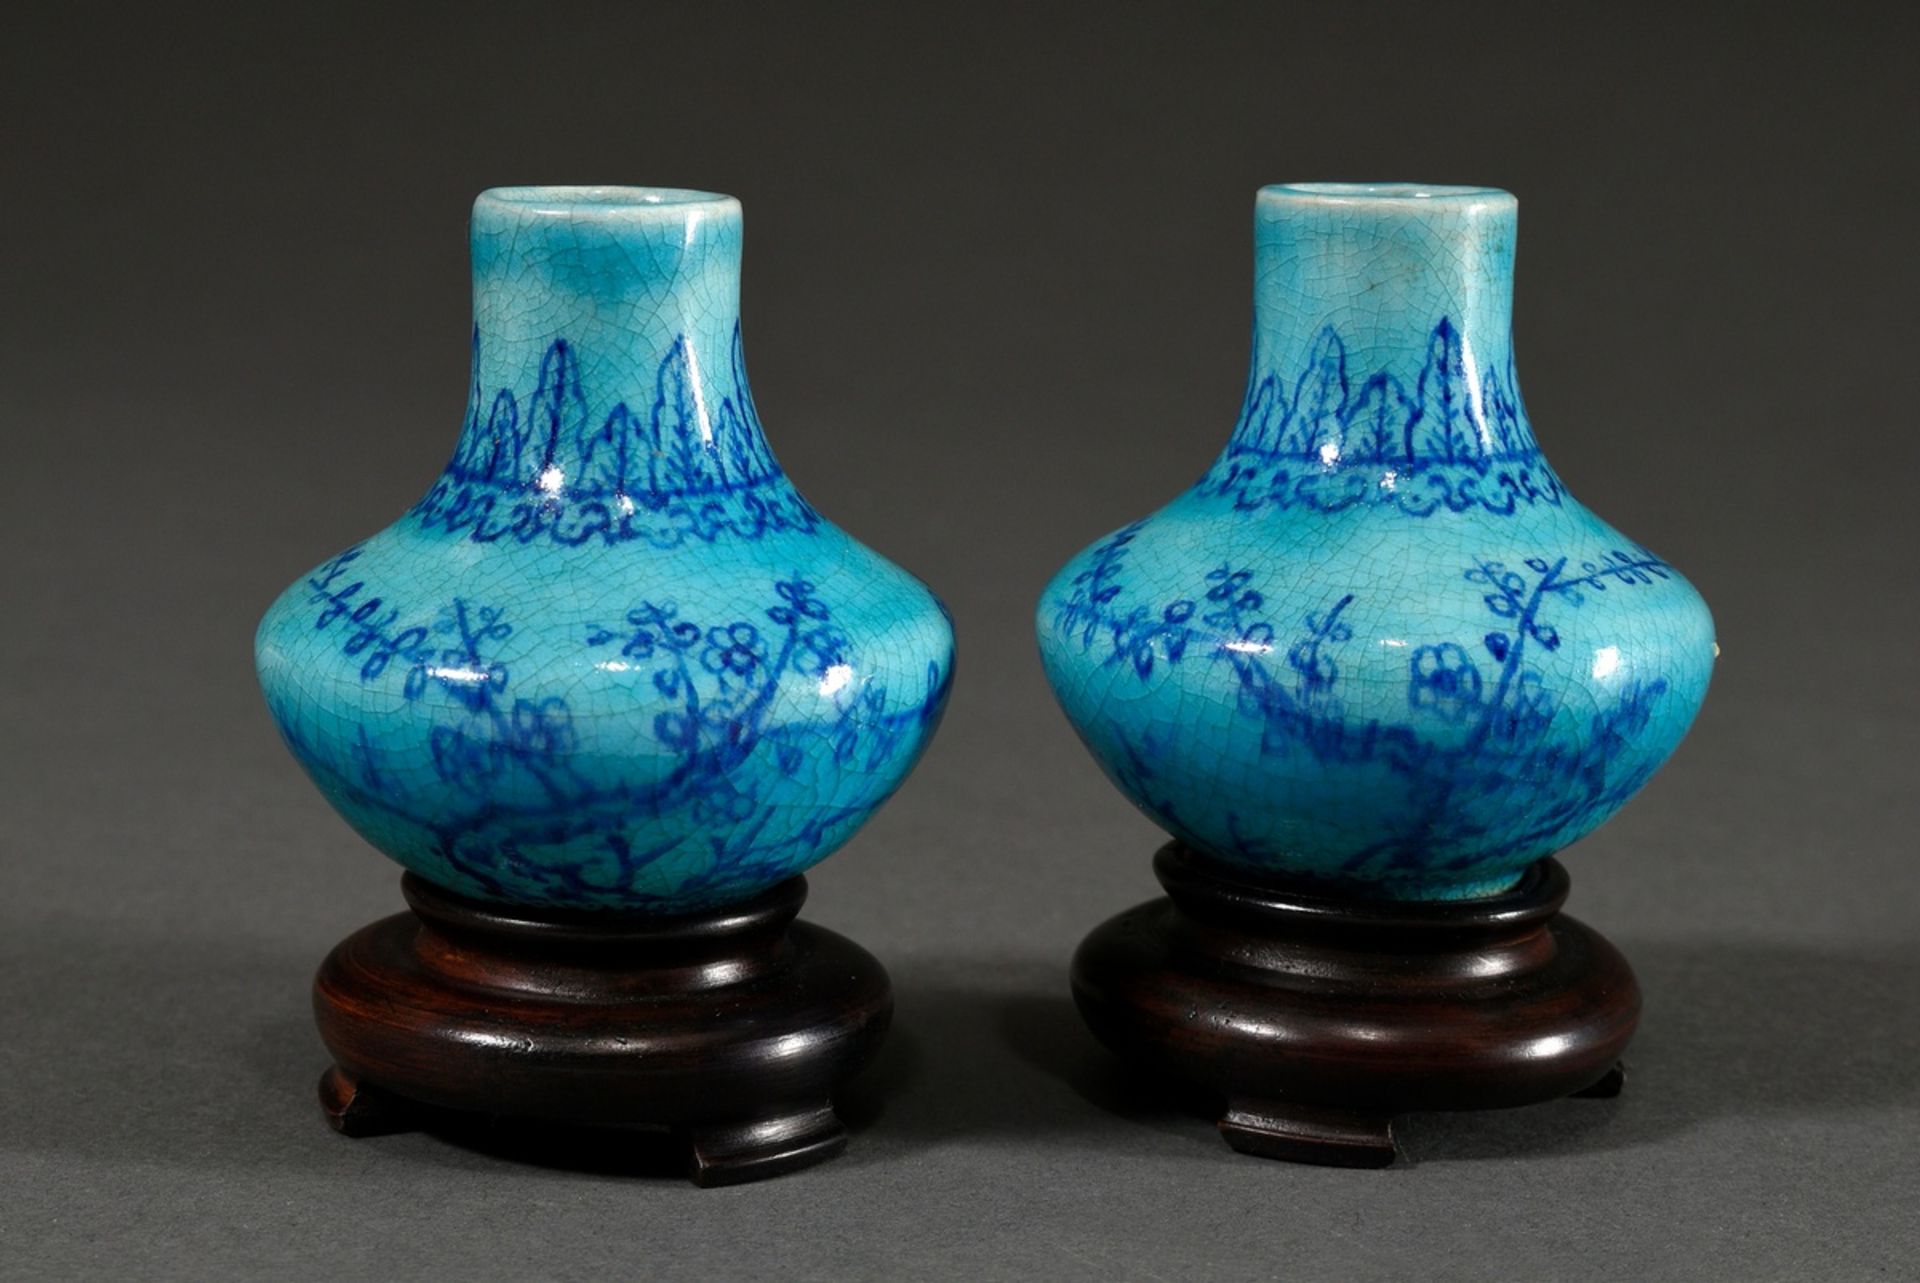 Pair of miniature porcelain vases with blue painting on turquoise crackle glaze "Blossoming Plum Tr